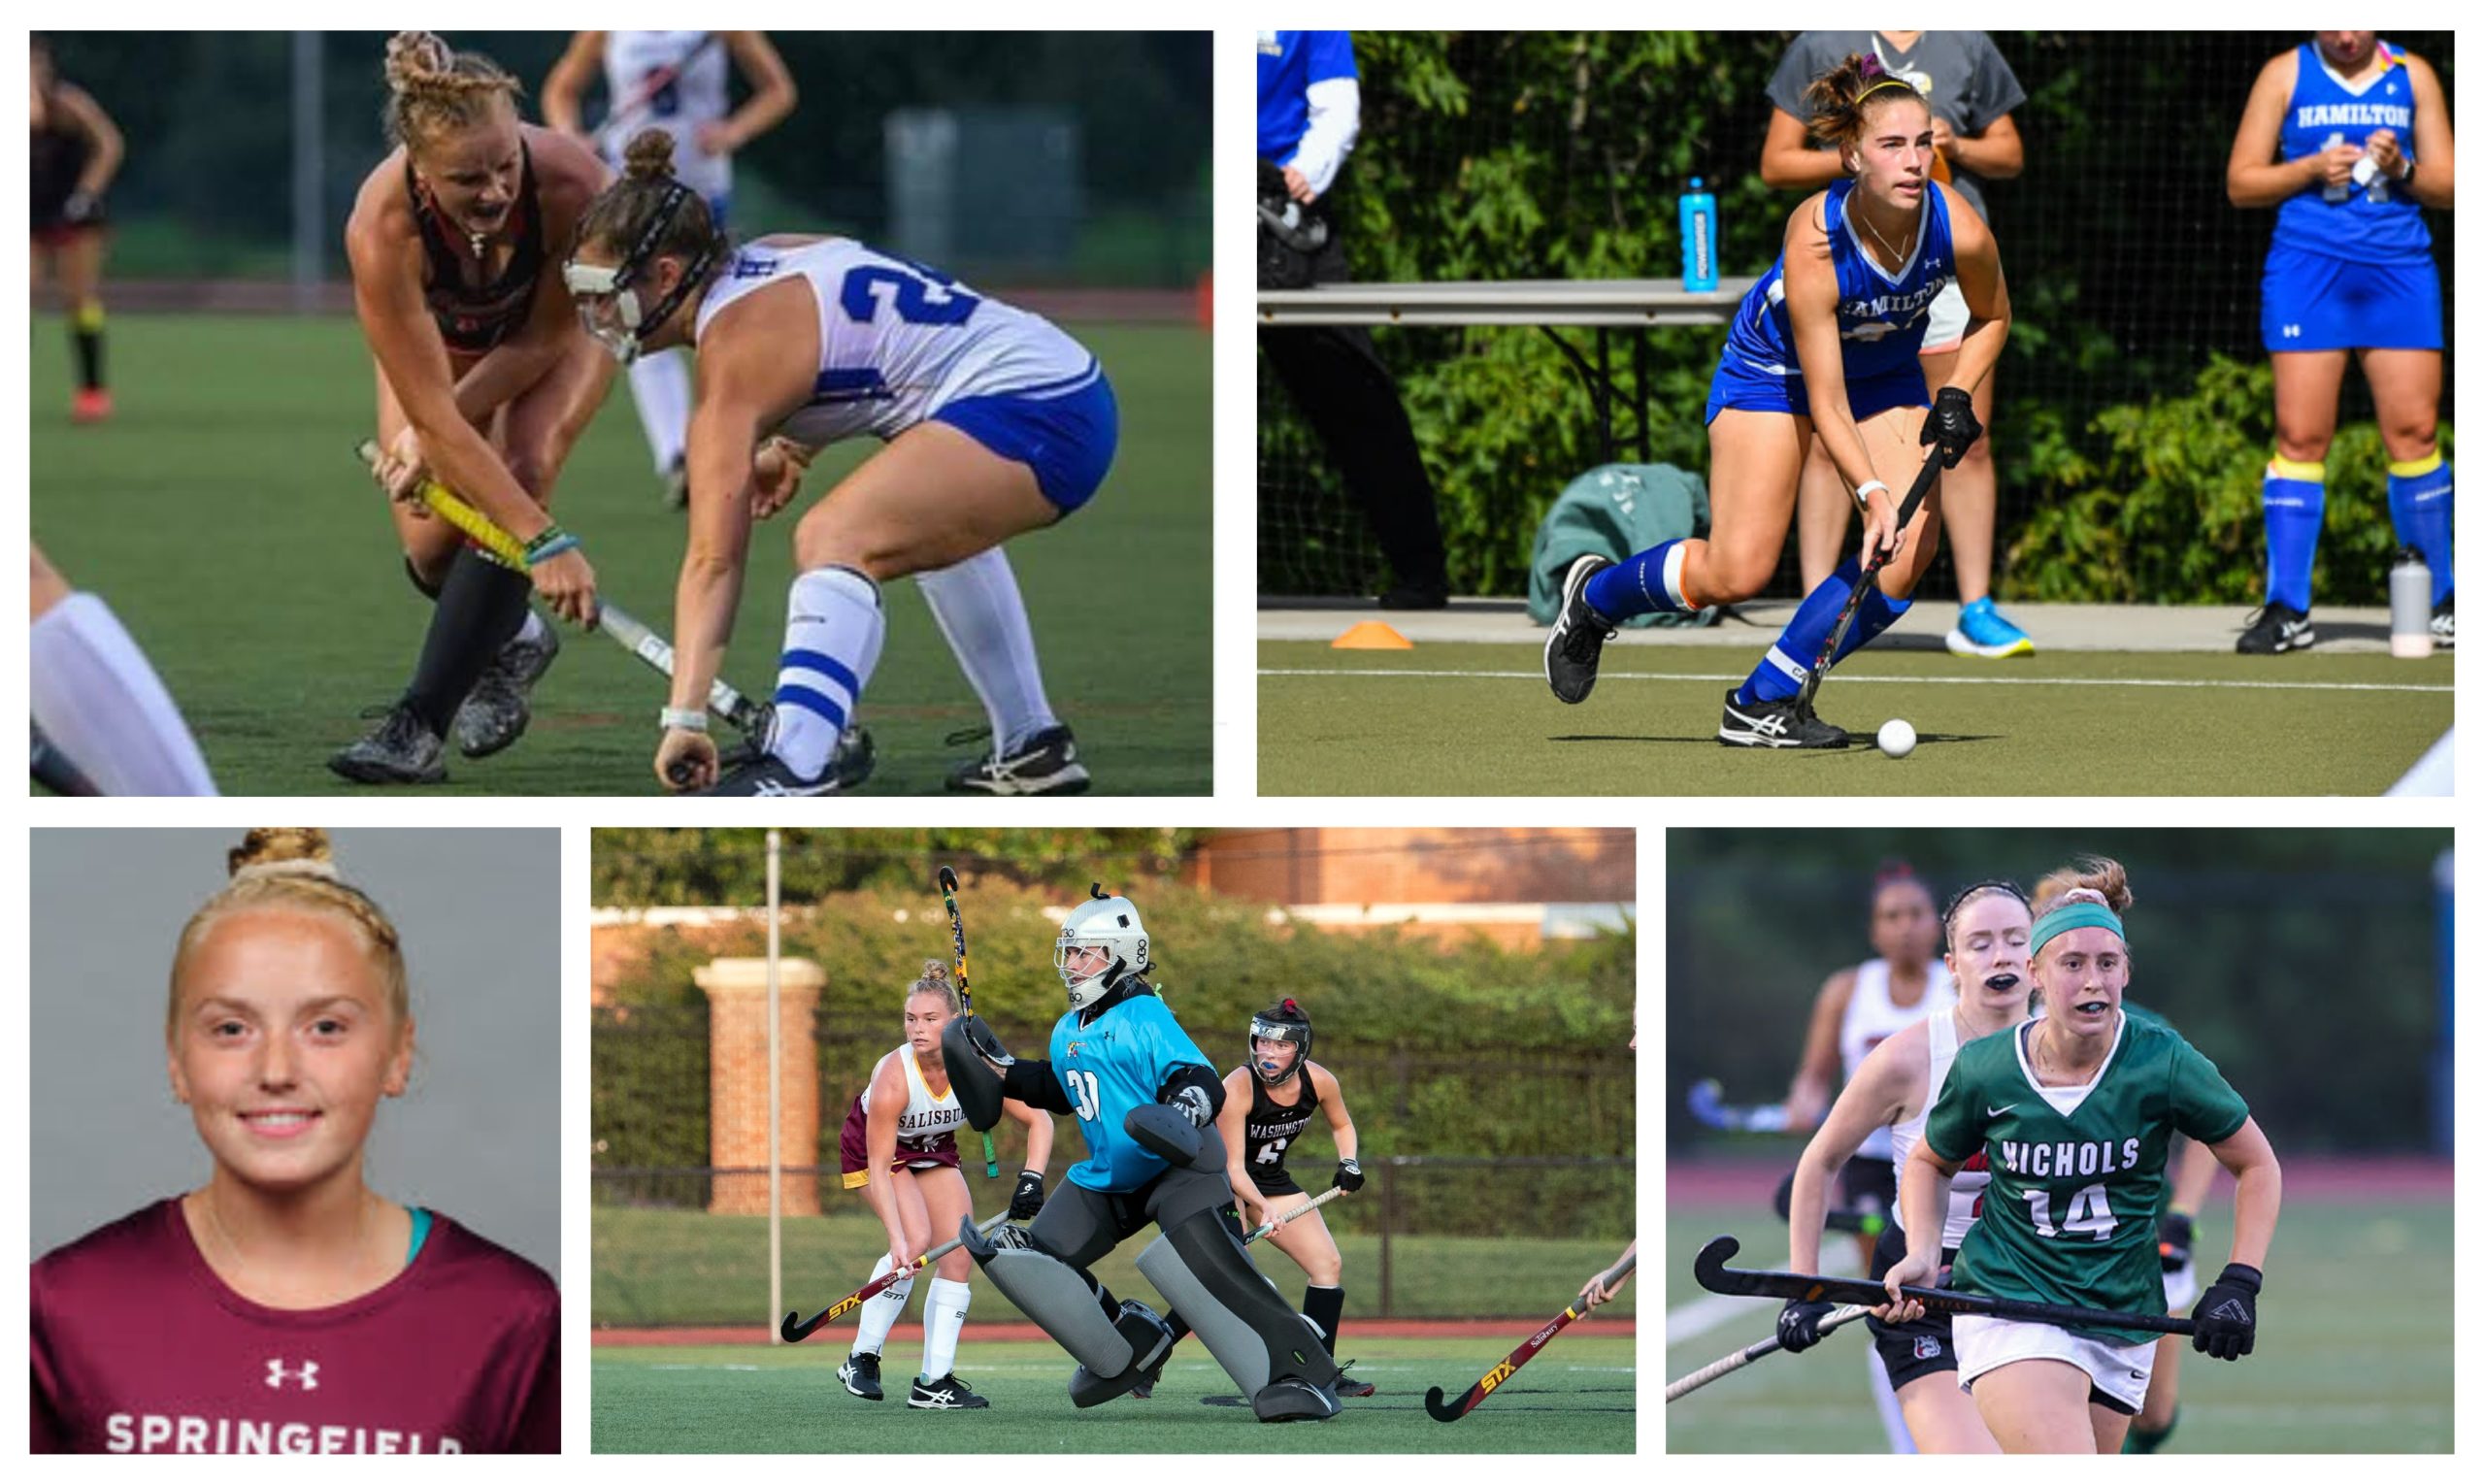 Walkers Field Hockey Alumnae Make an Impact at The Collegiate Level